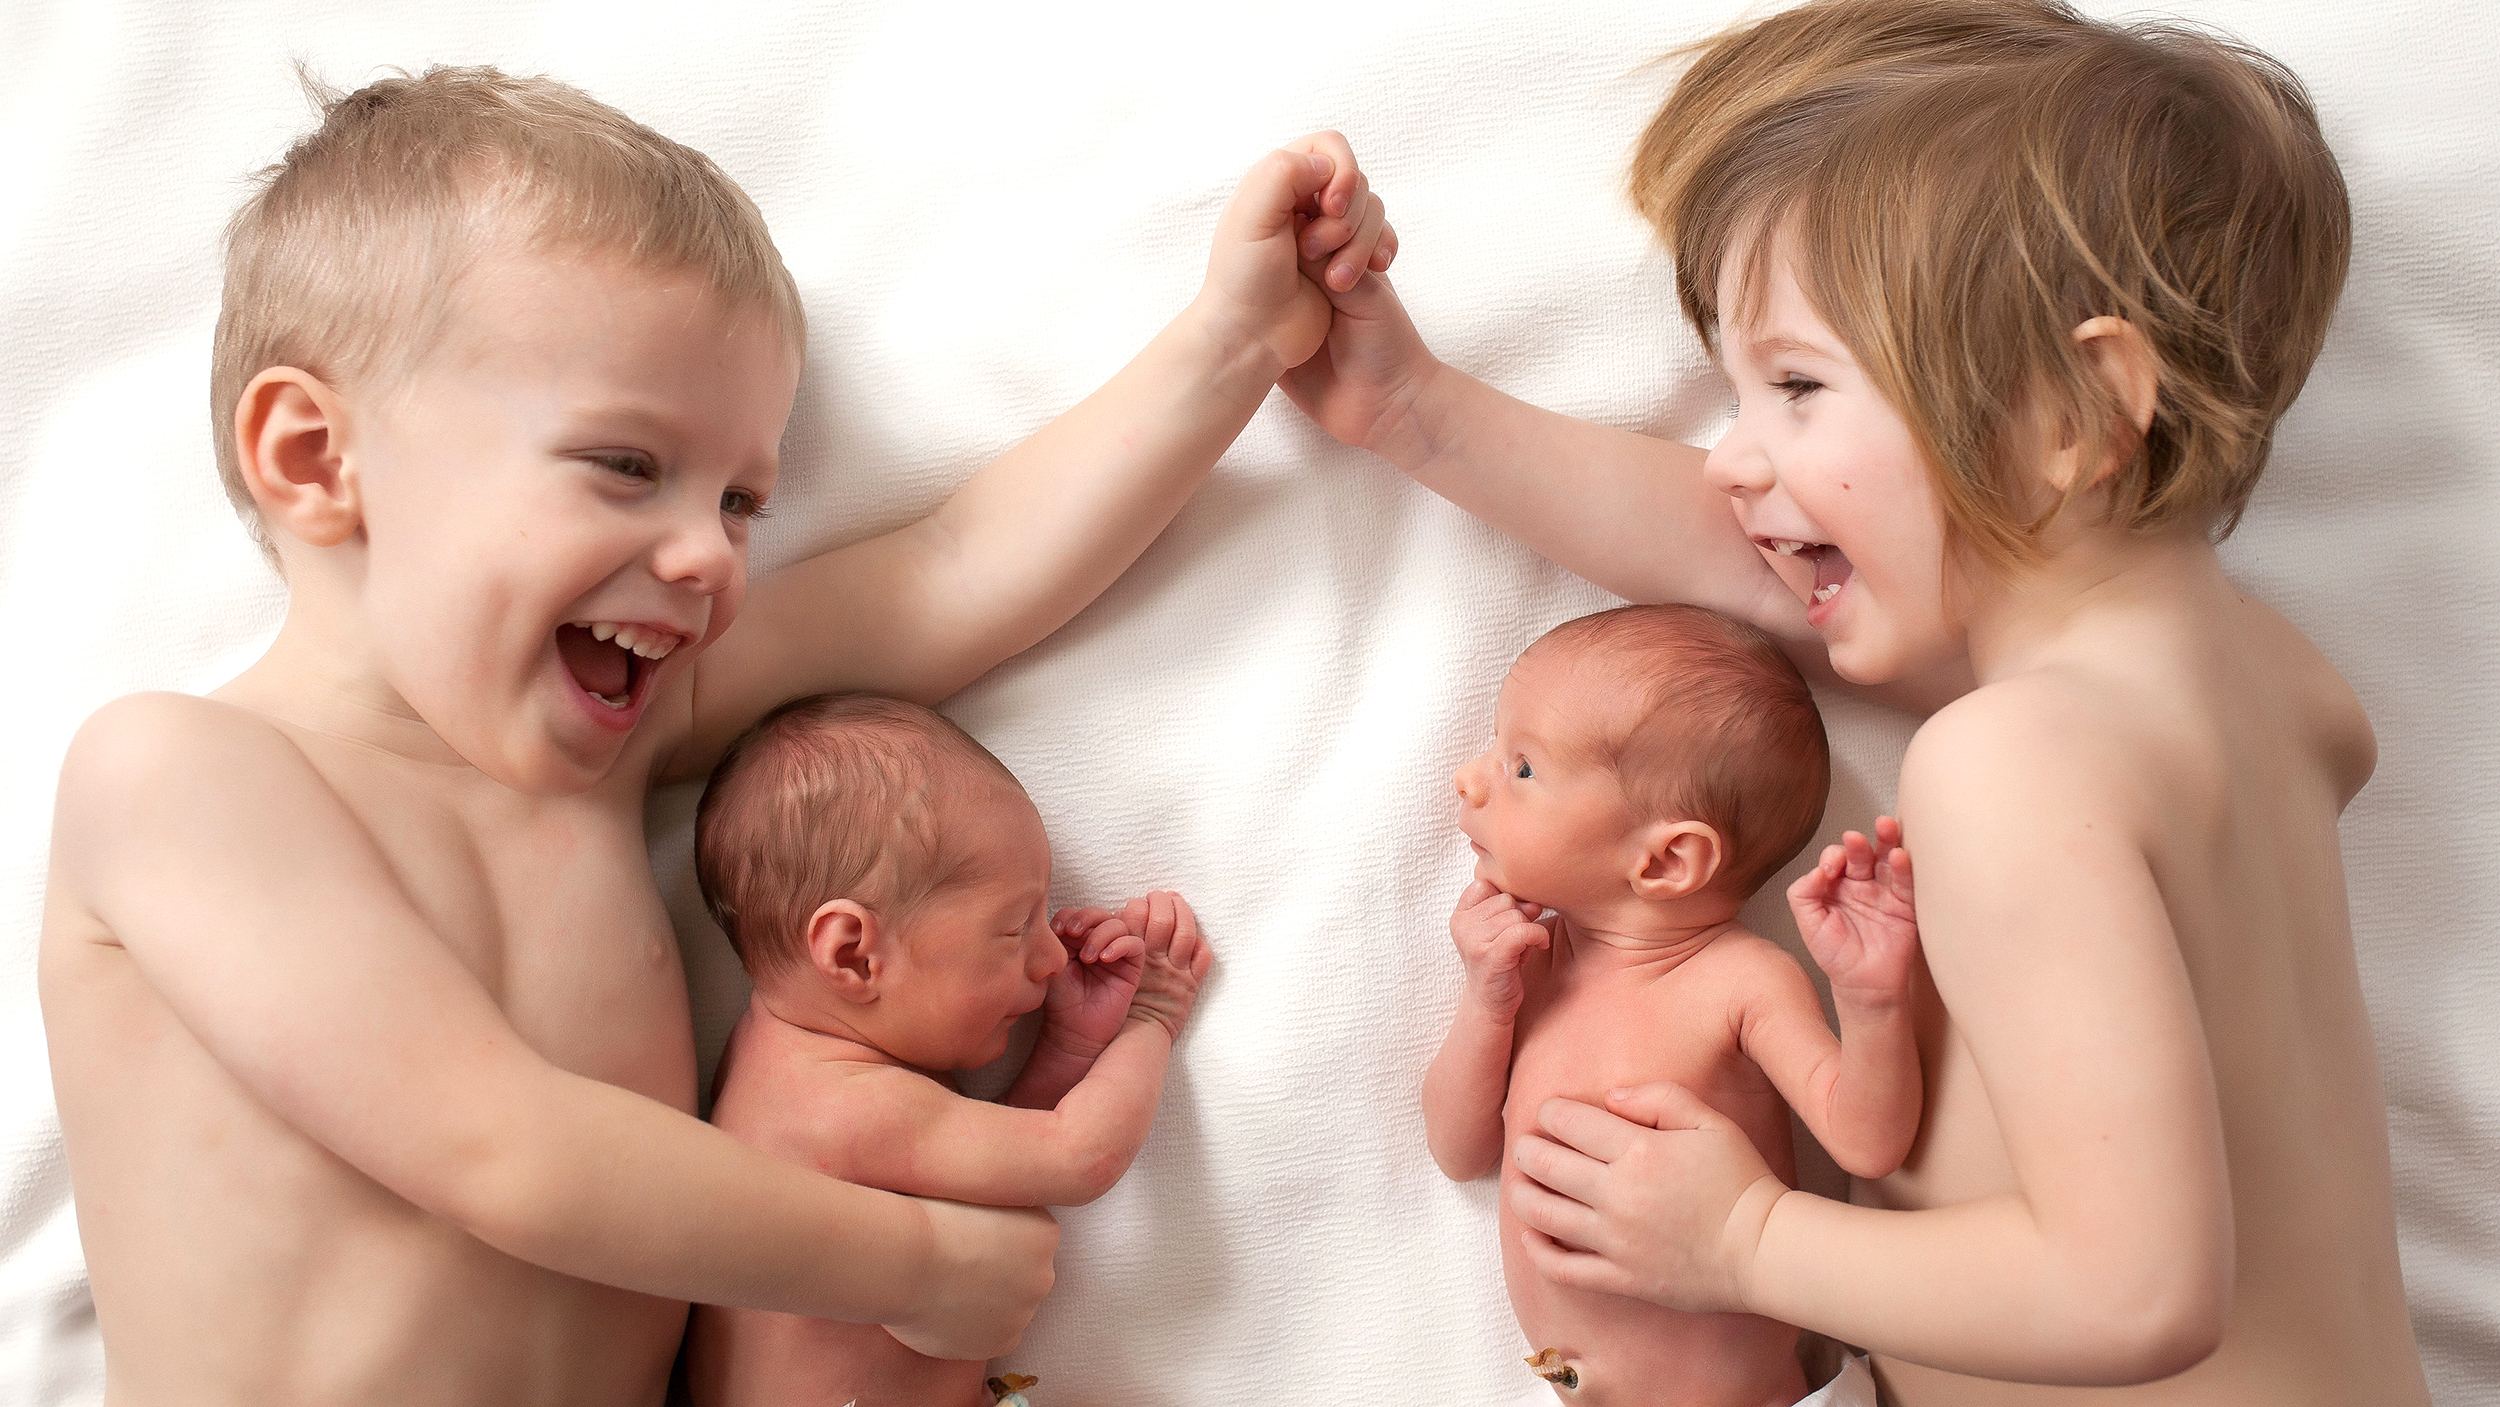 Photo shoot of two sets of twins in one family is adorable - TODAY.com